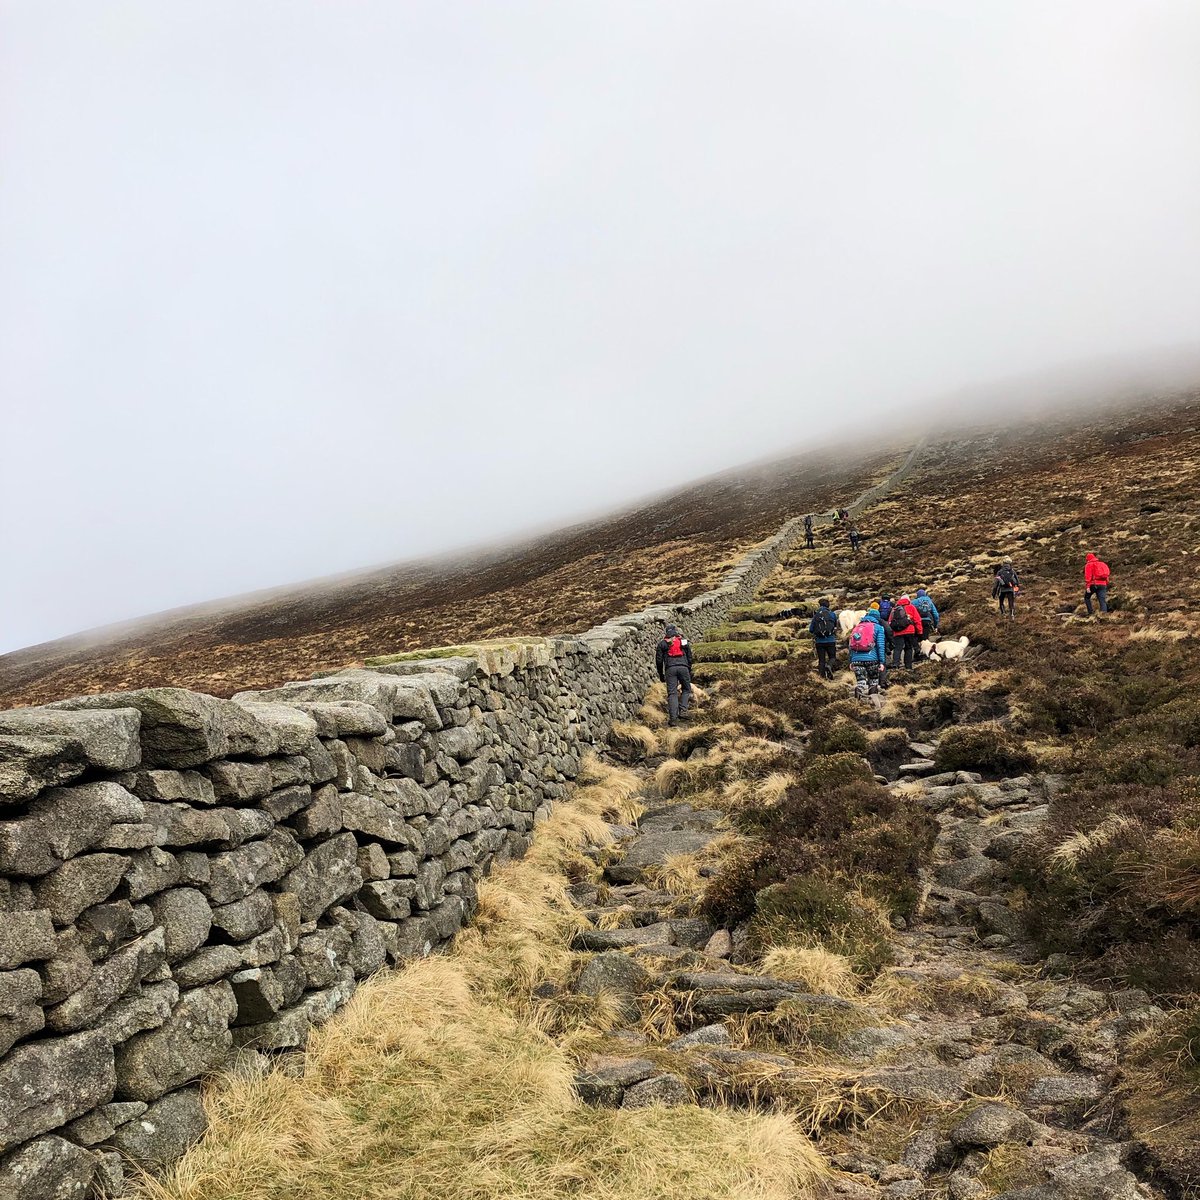 Great hike and great company climbing Slieve Donard from Bloody Bridge over the weekend. Thanks so much to @NI_EXPLORER for introducing me to this lovely group of people and doggos! ❤️ @visitmourne @EnjoyTheMournes @lovemourne @DiscoverIreland @DiscoverNI